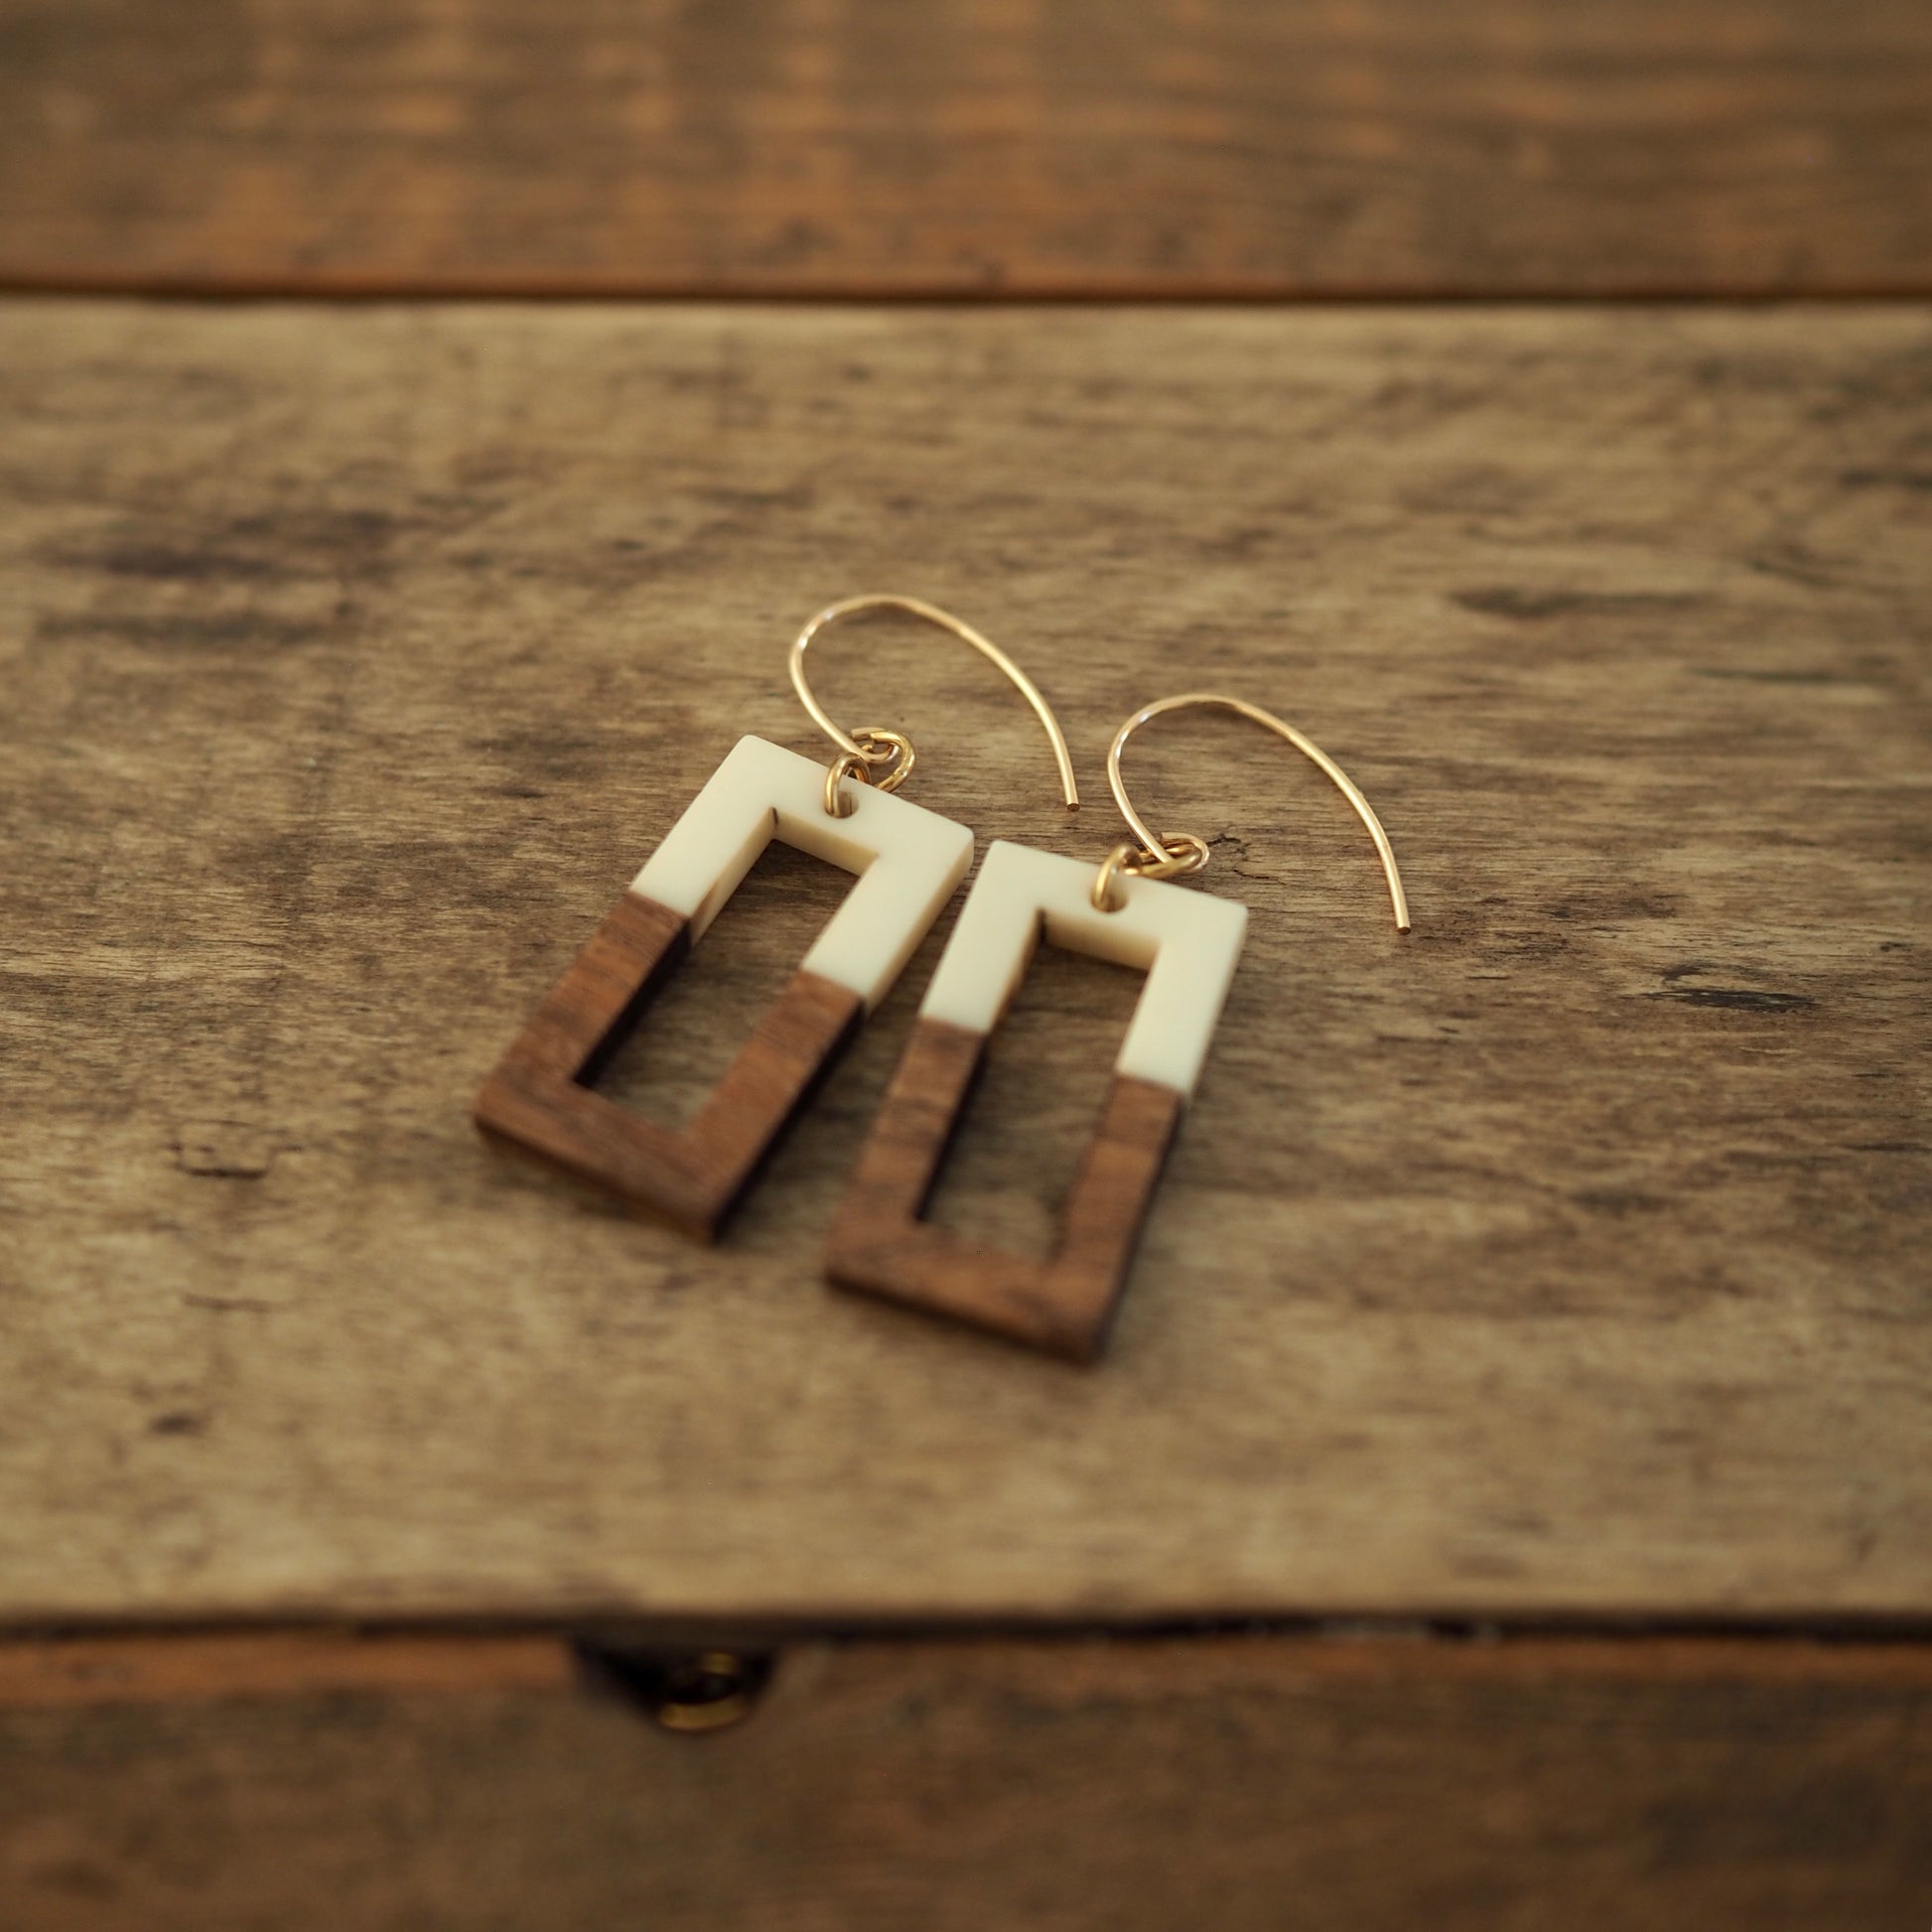 Rectangular wood and resin earrings for fall by Wallis Designs